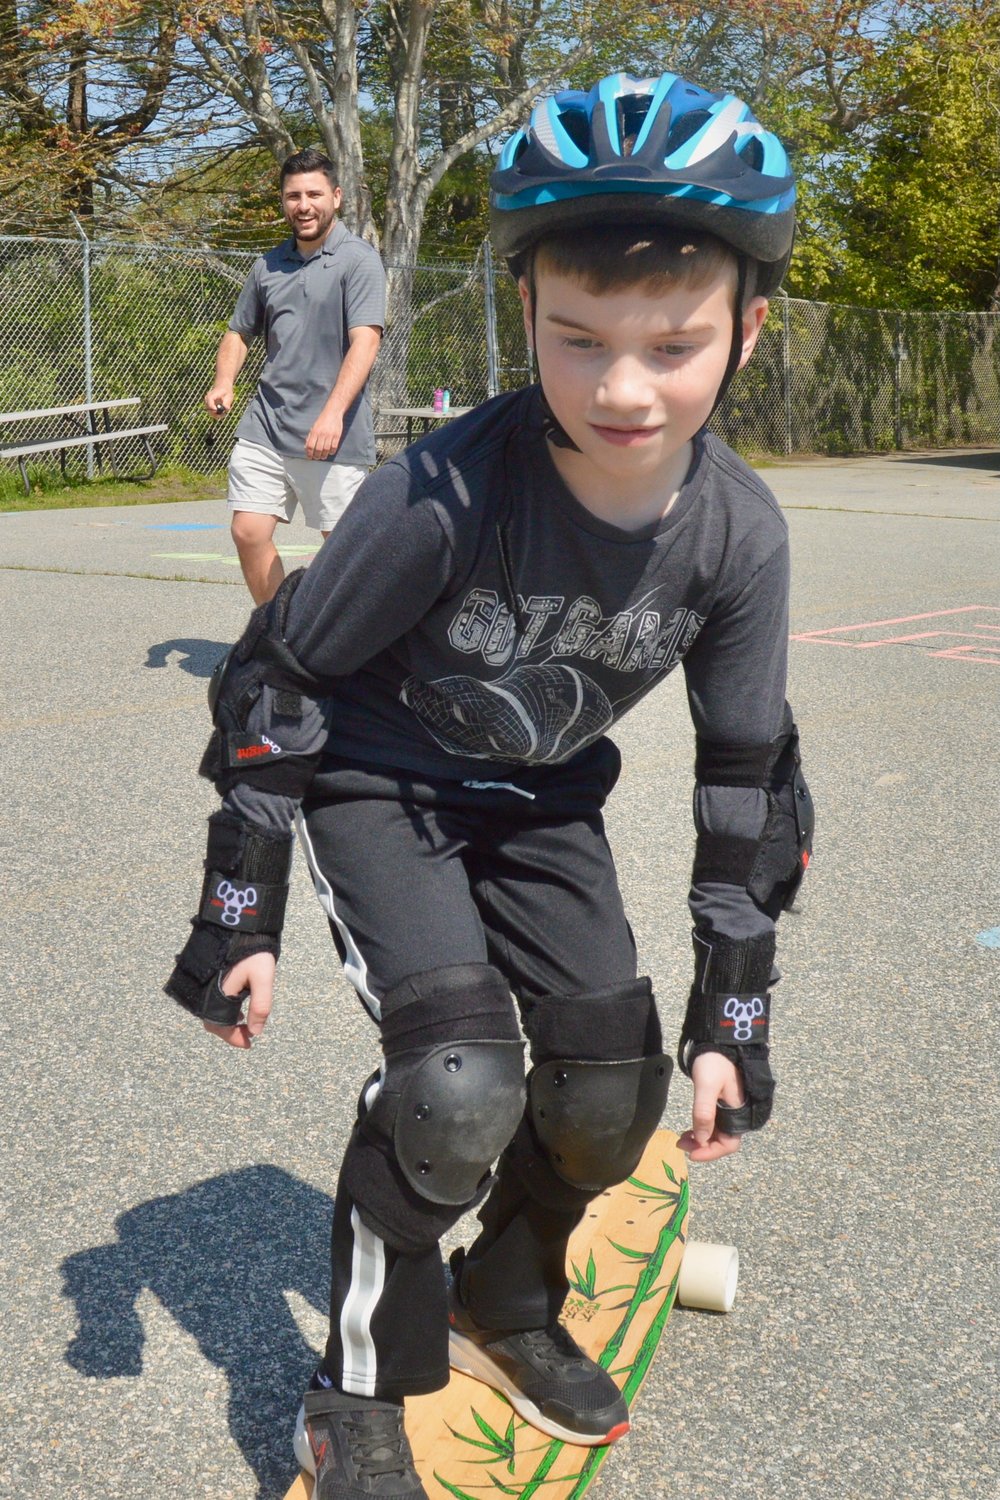 Melville School P.E. instructor Ryan Soares (background) watches fourth-grader Lucas try his hand at the longboard.